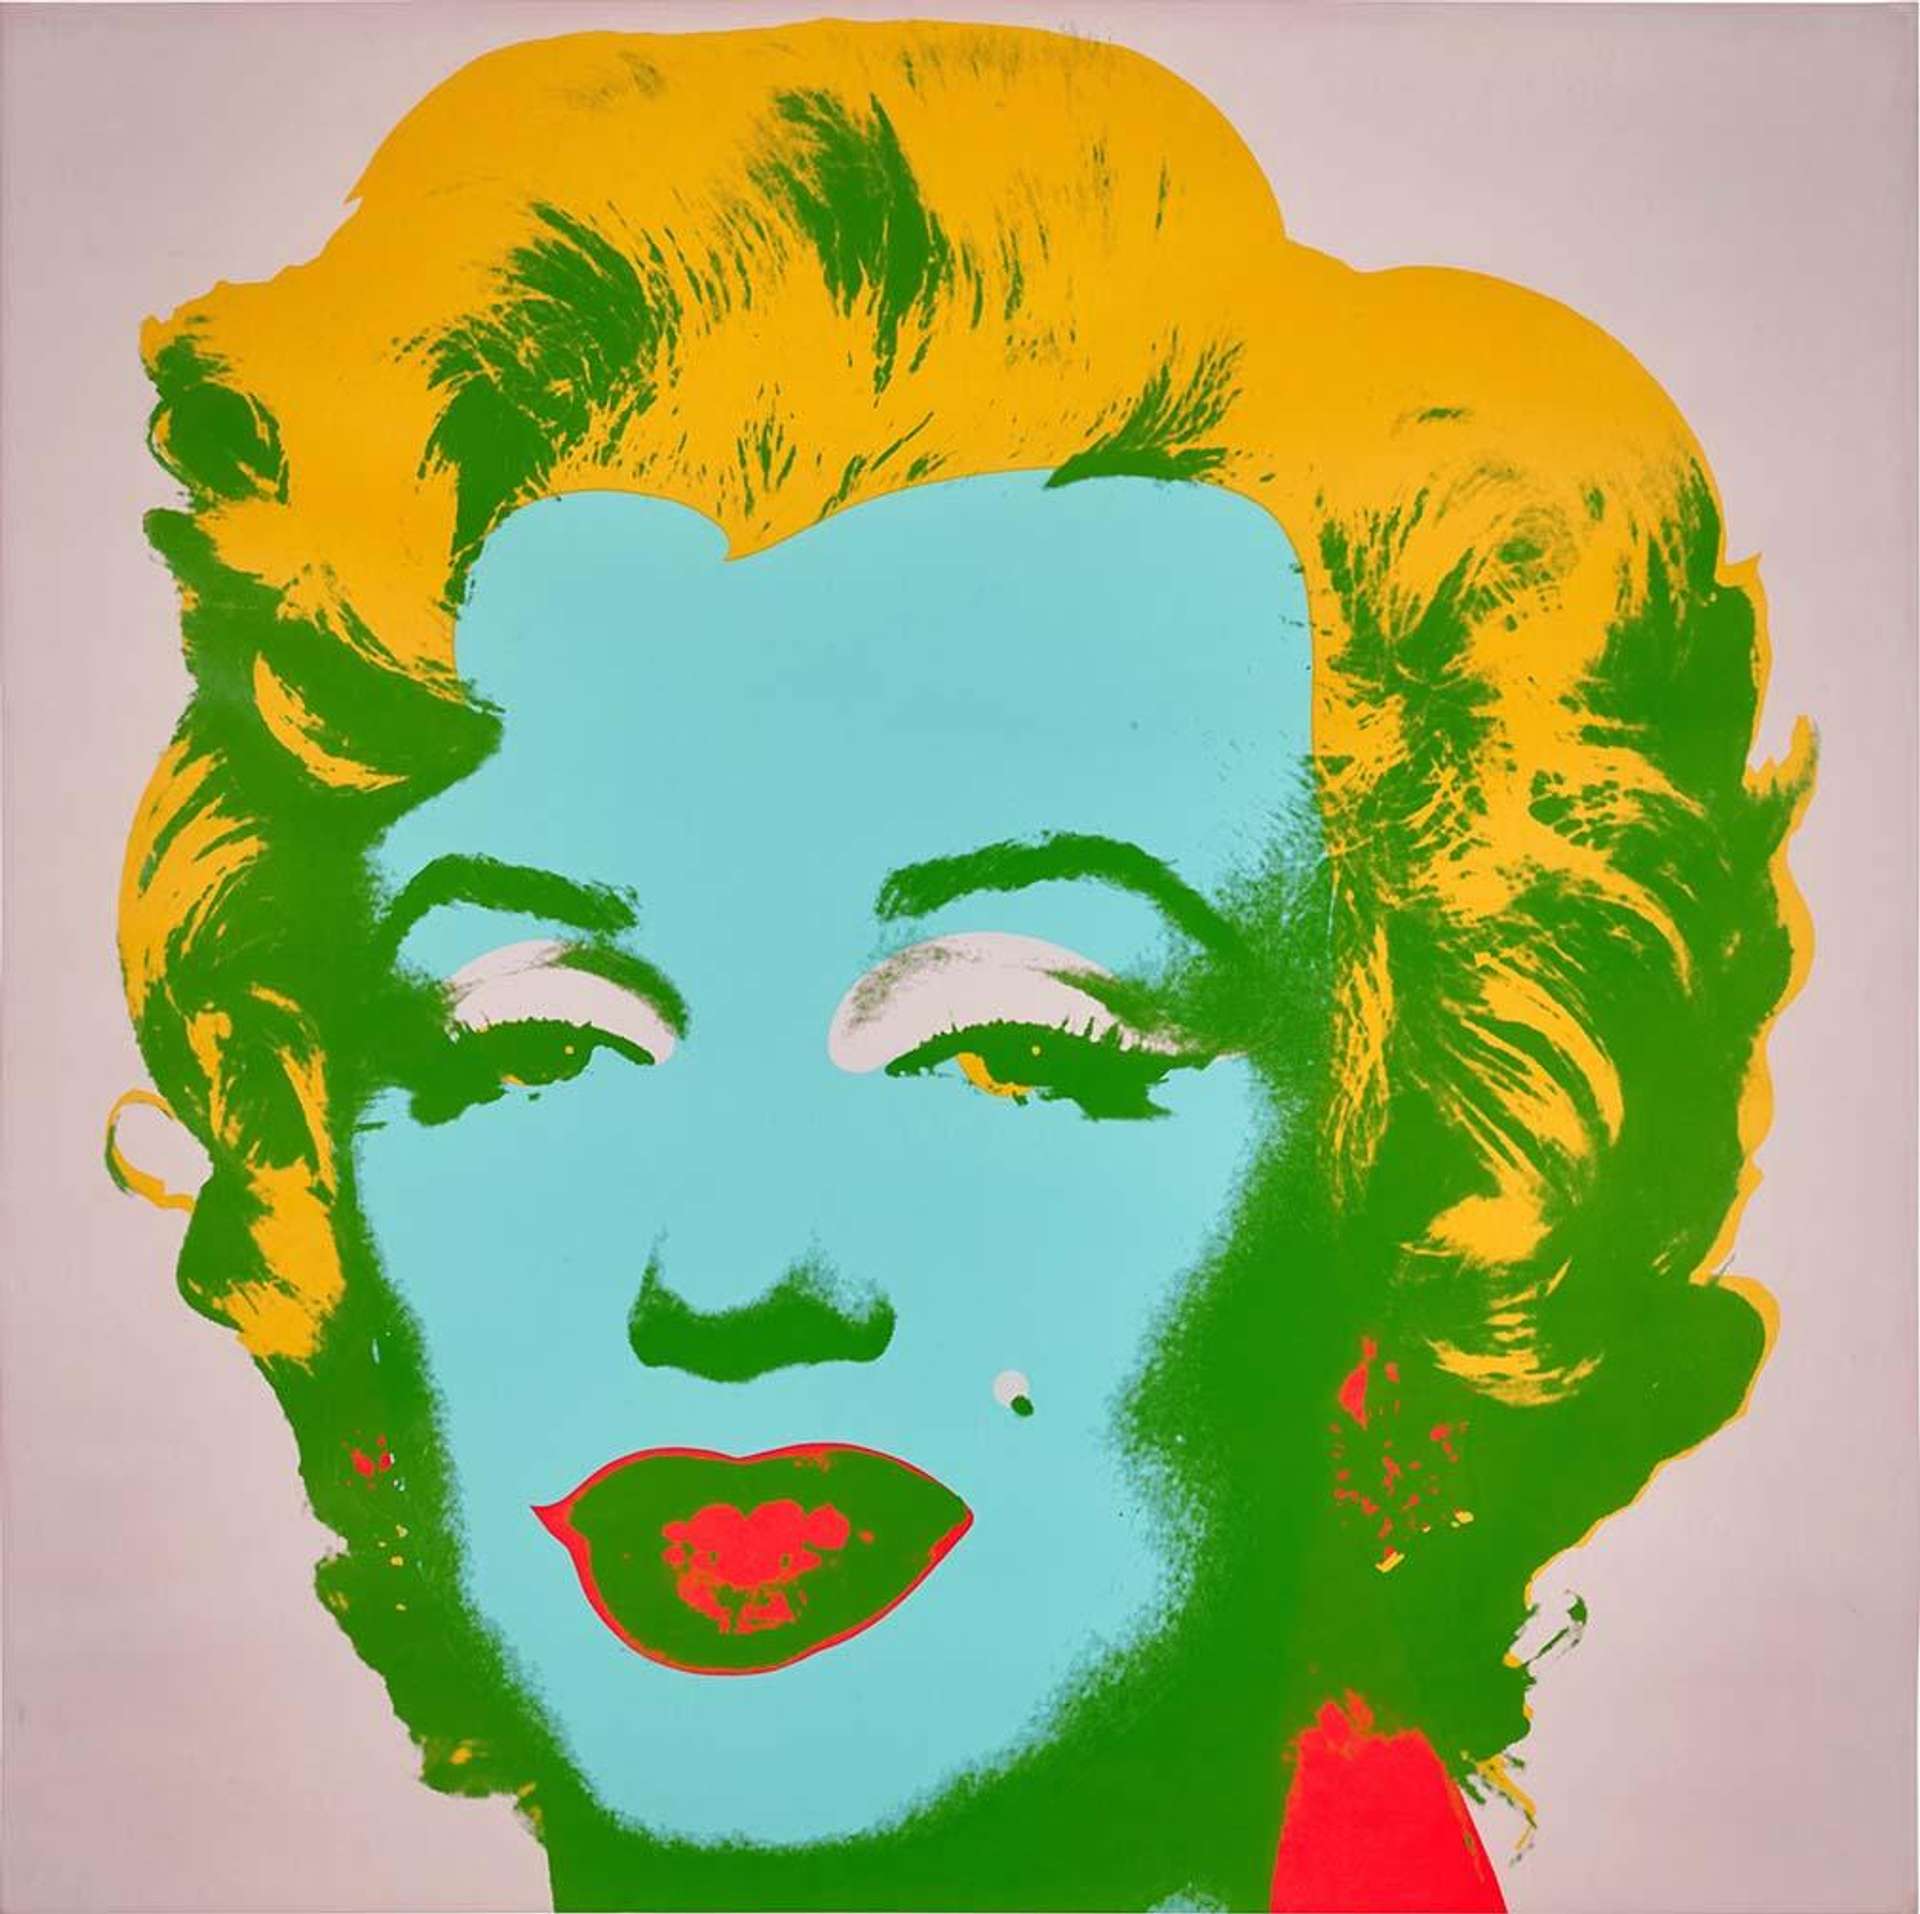 A screenprint by Andy Warhol depicting the portrait of Marilyn Monroe in teal, yellow and red against a light pink background